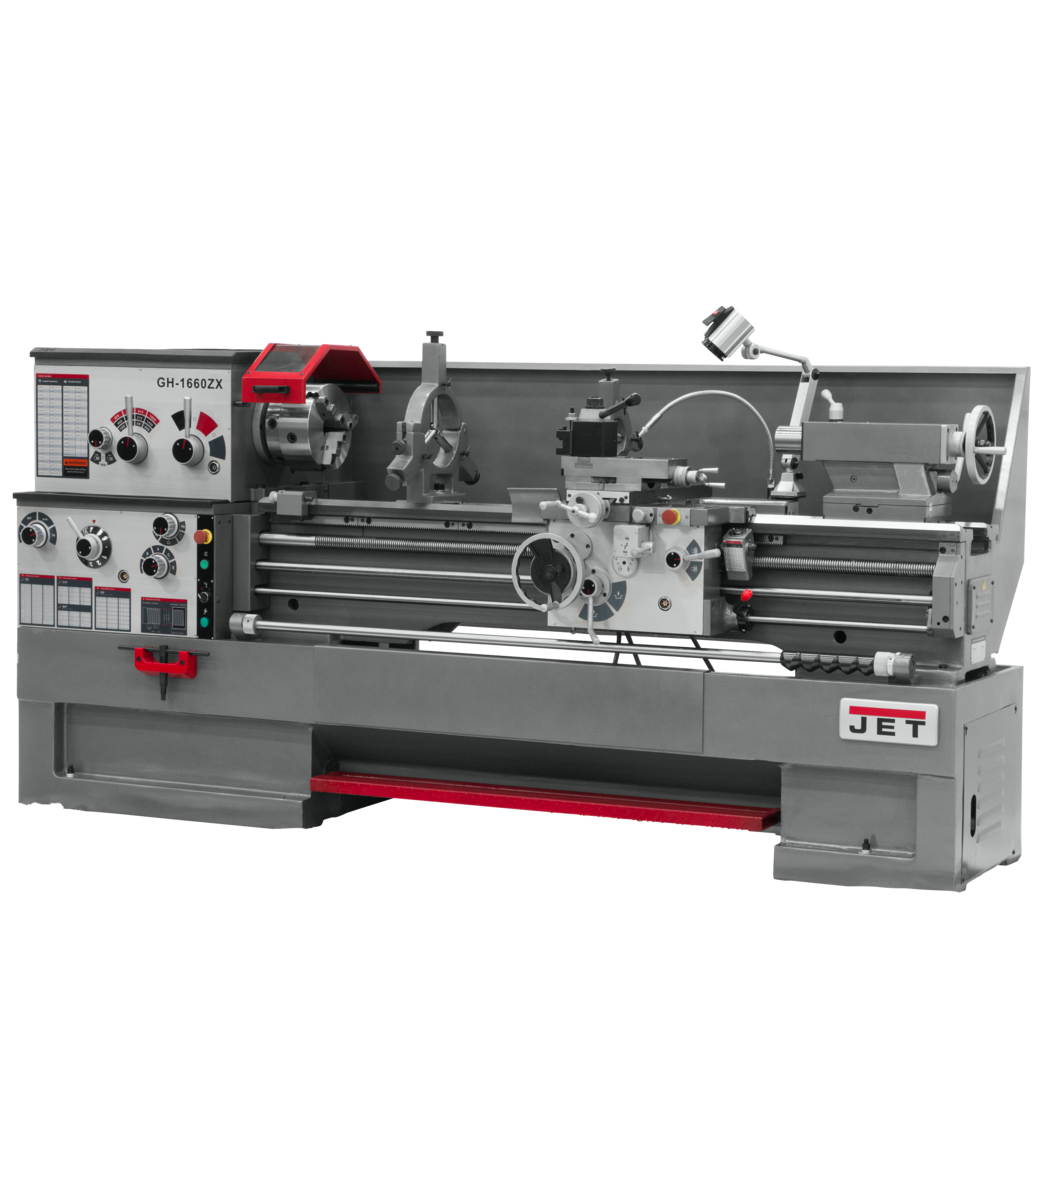 321452, GH1860-ZX Lathe with C80 DRO & Taper Attachment, Jet, Metalworking, Turning, Lathes